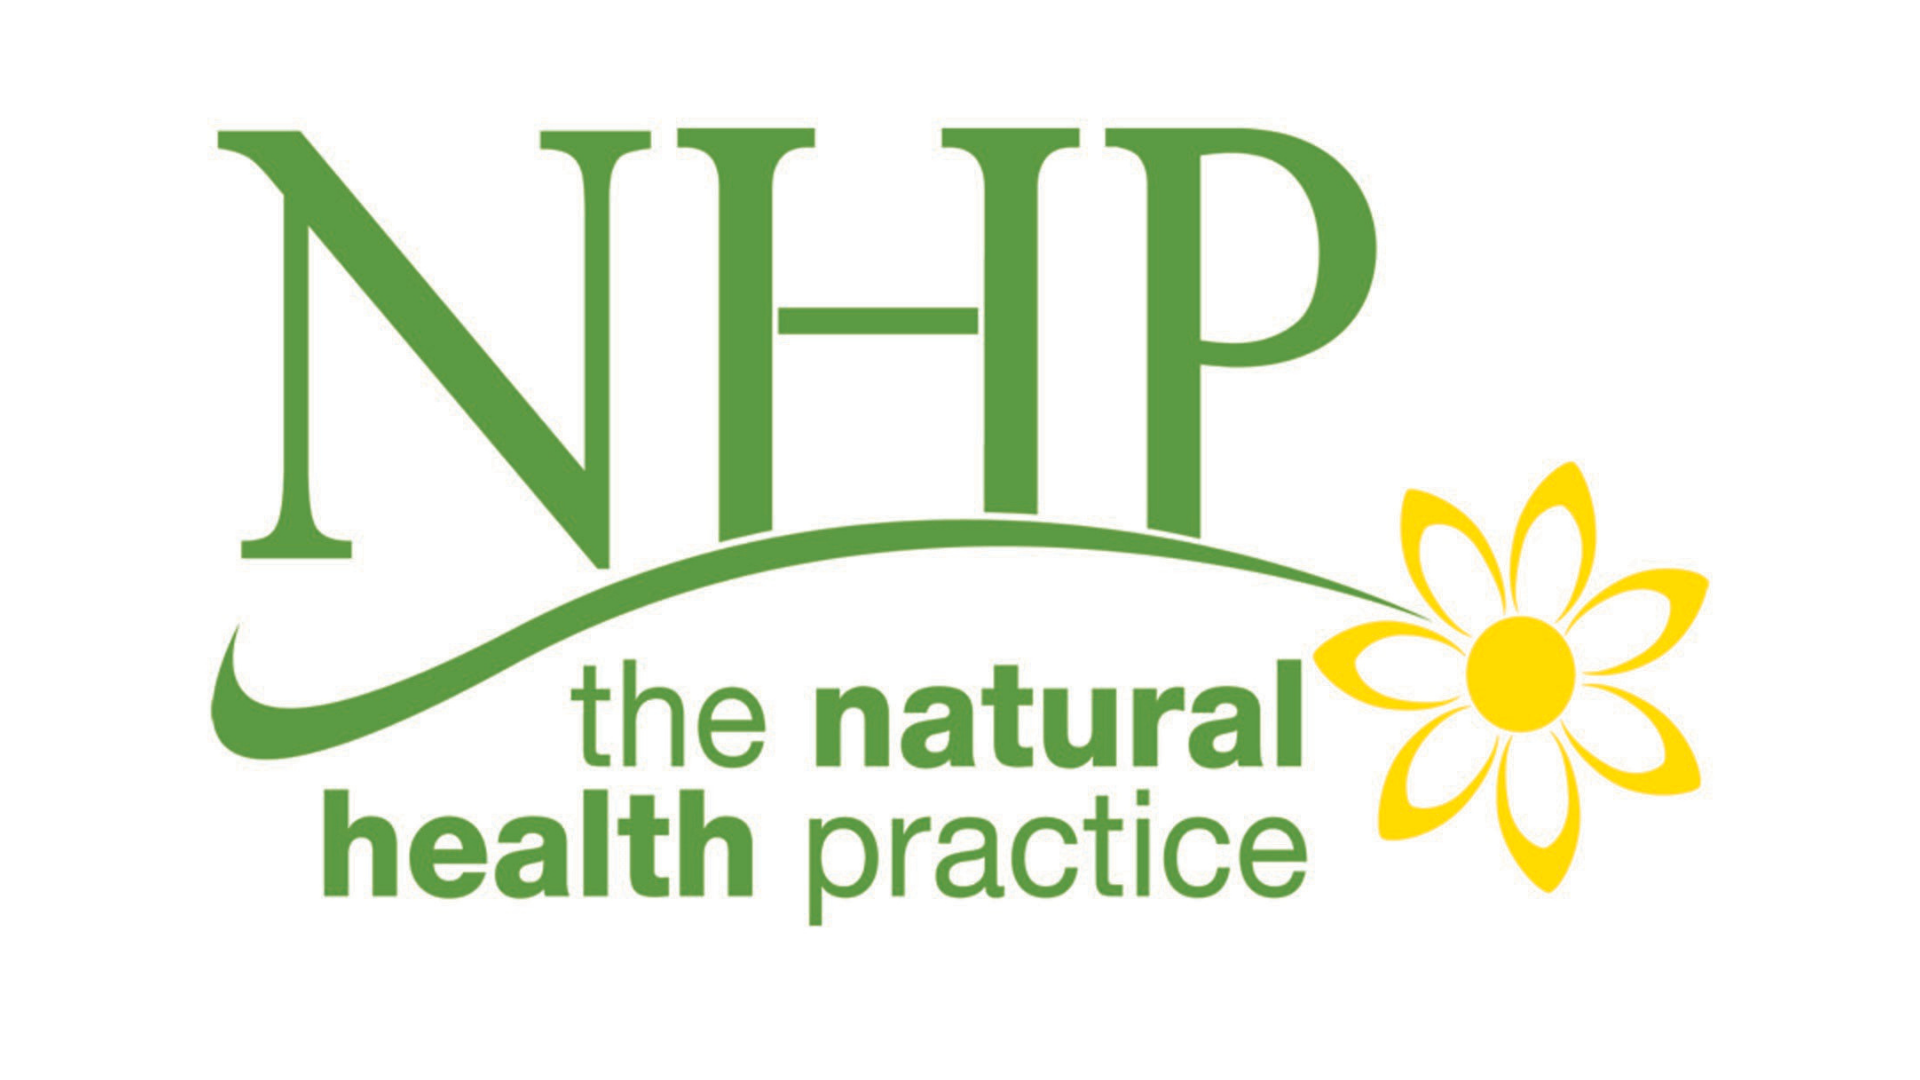 The Natural Health Practice logo